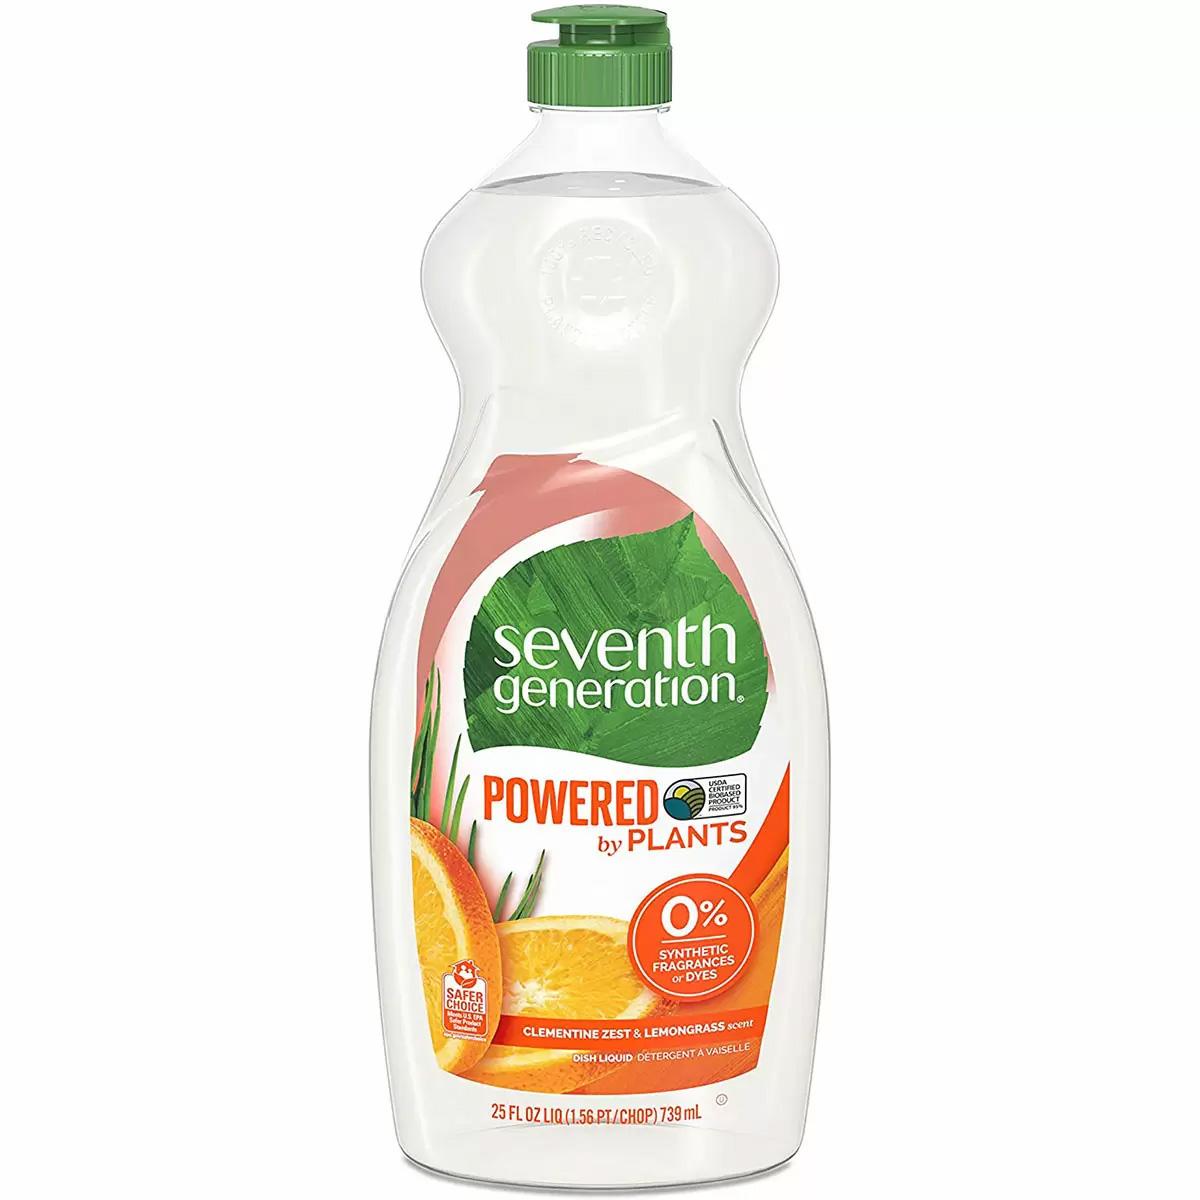 6x Seventh Generation Clementine Dish Liquid Soap for $13.32 Shipped